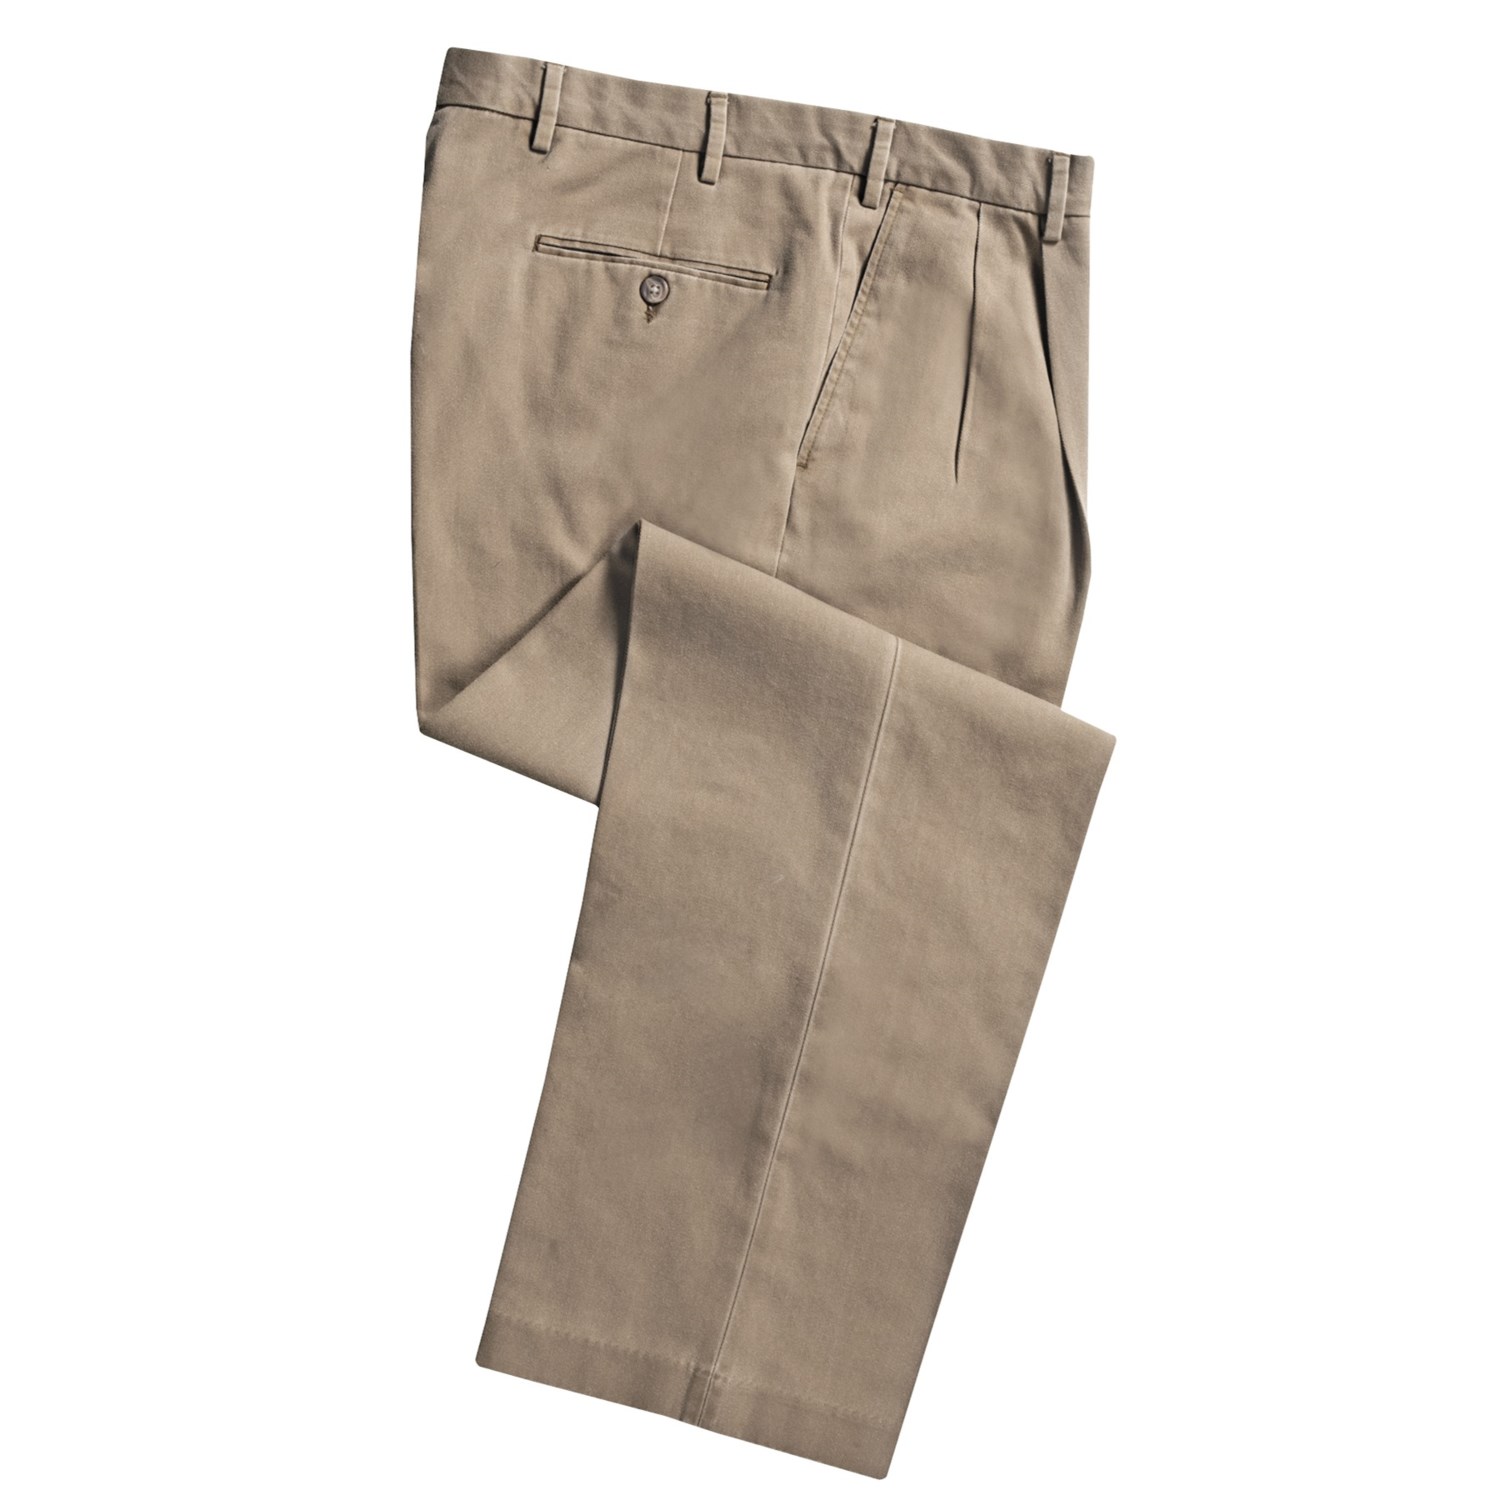 Cotton Twill Pants (For Men) - Save 60%